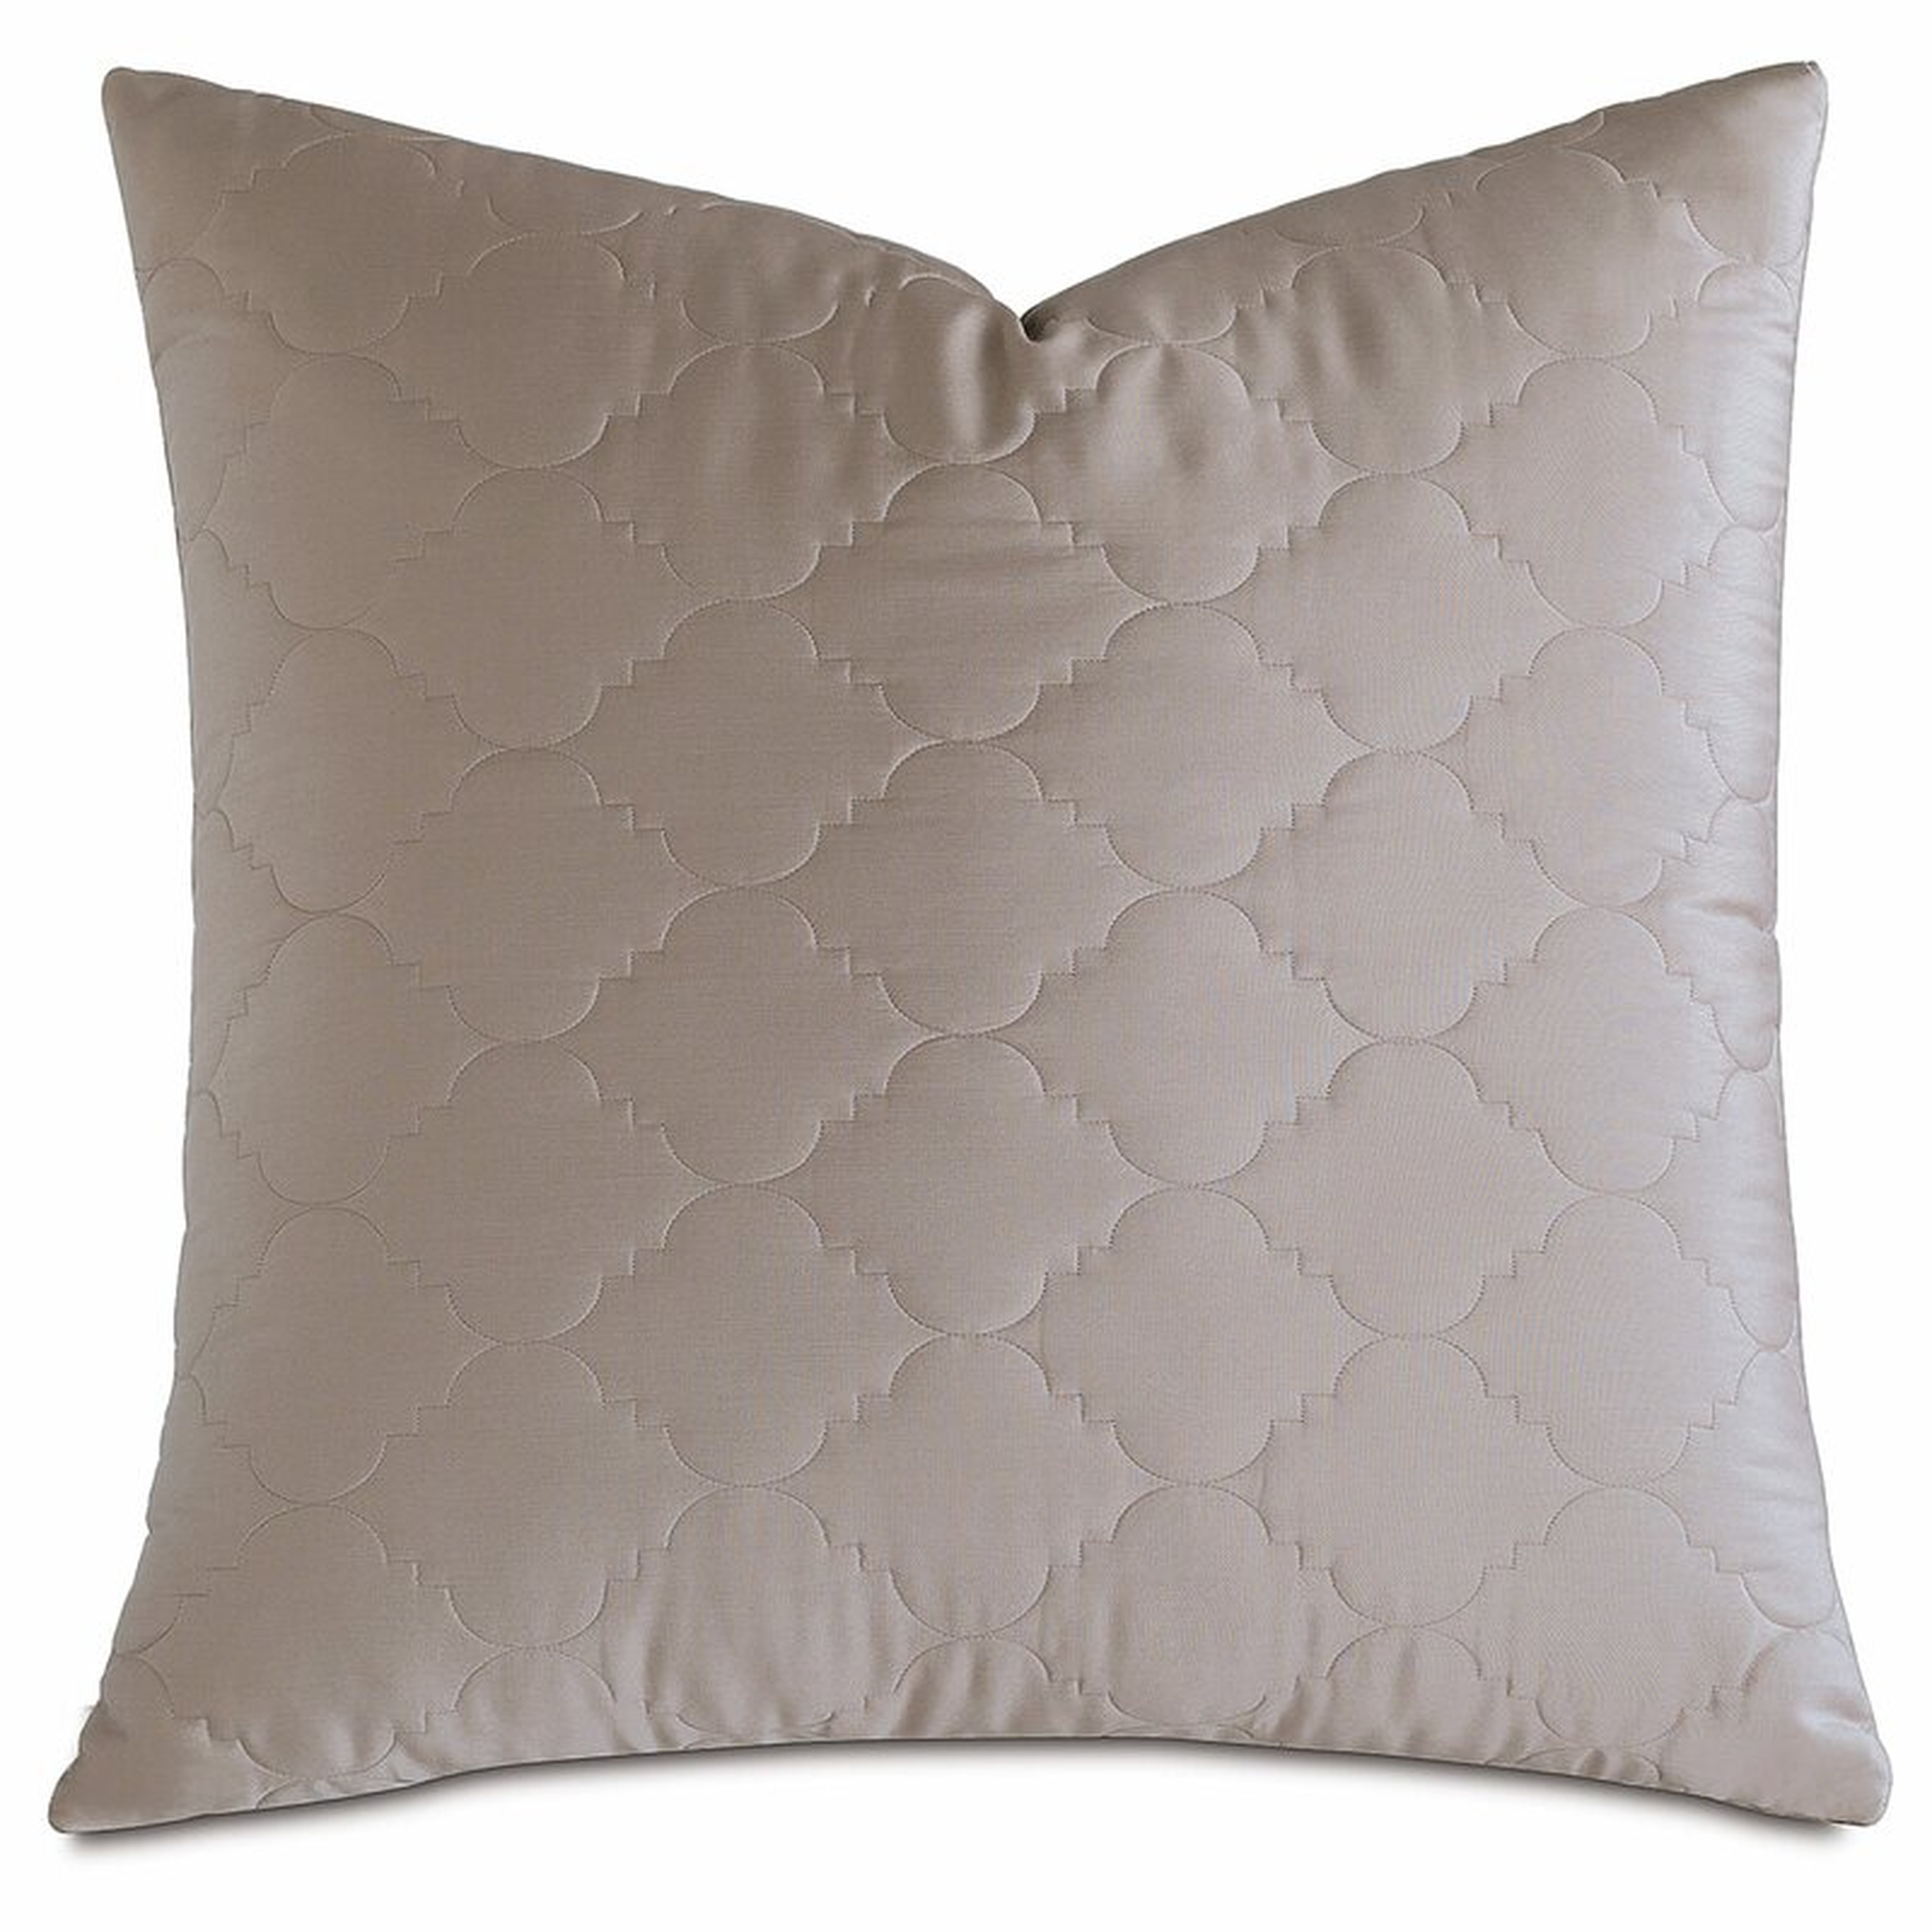 Eastern Accents Viola Quilted Standard Sham by De Medici - Perigold